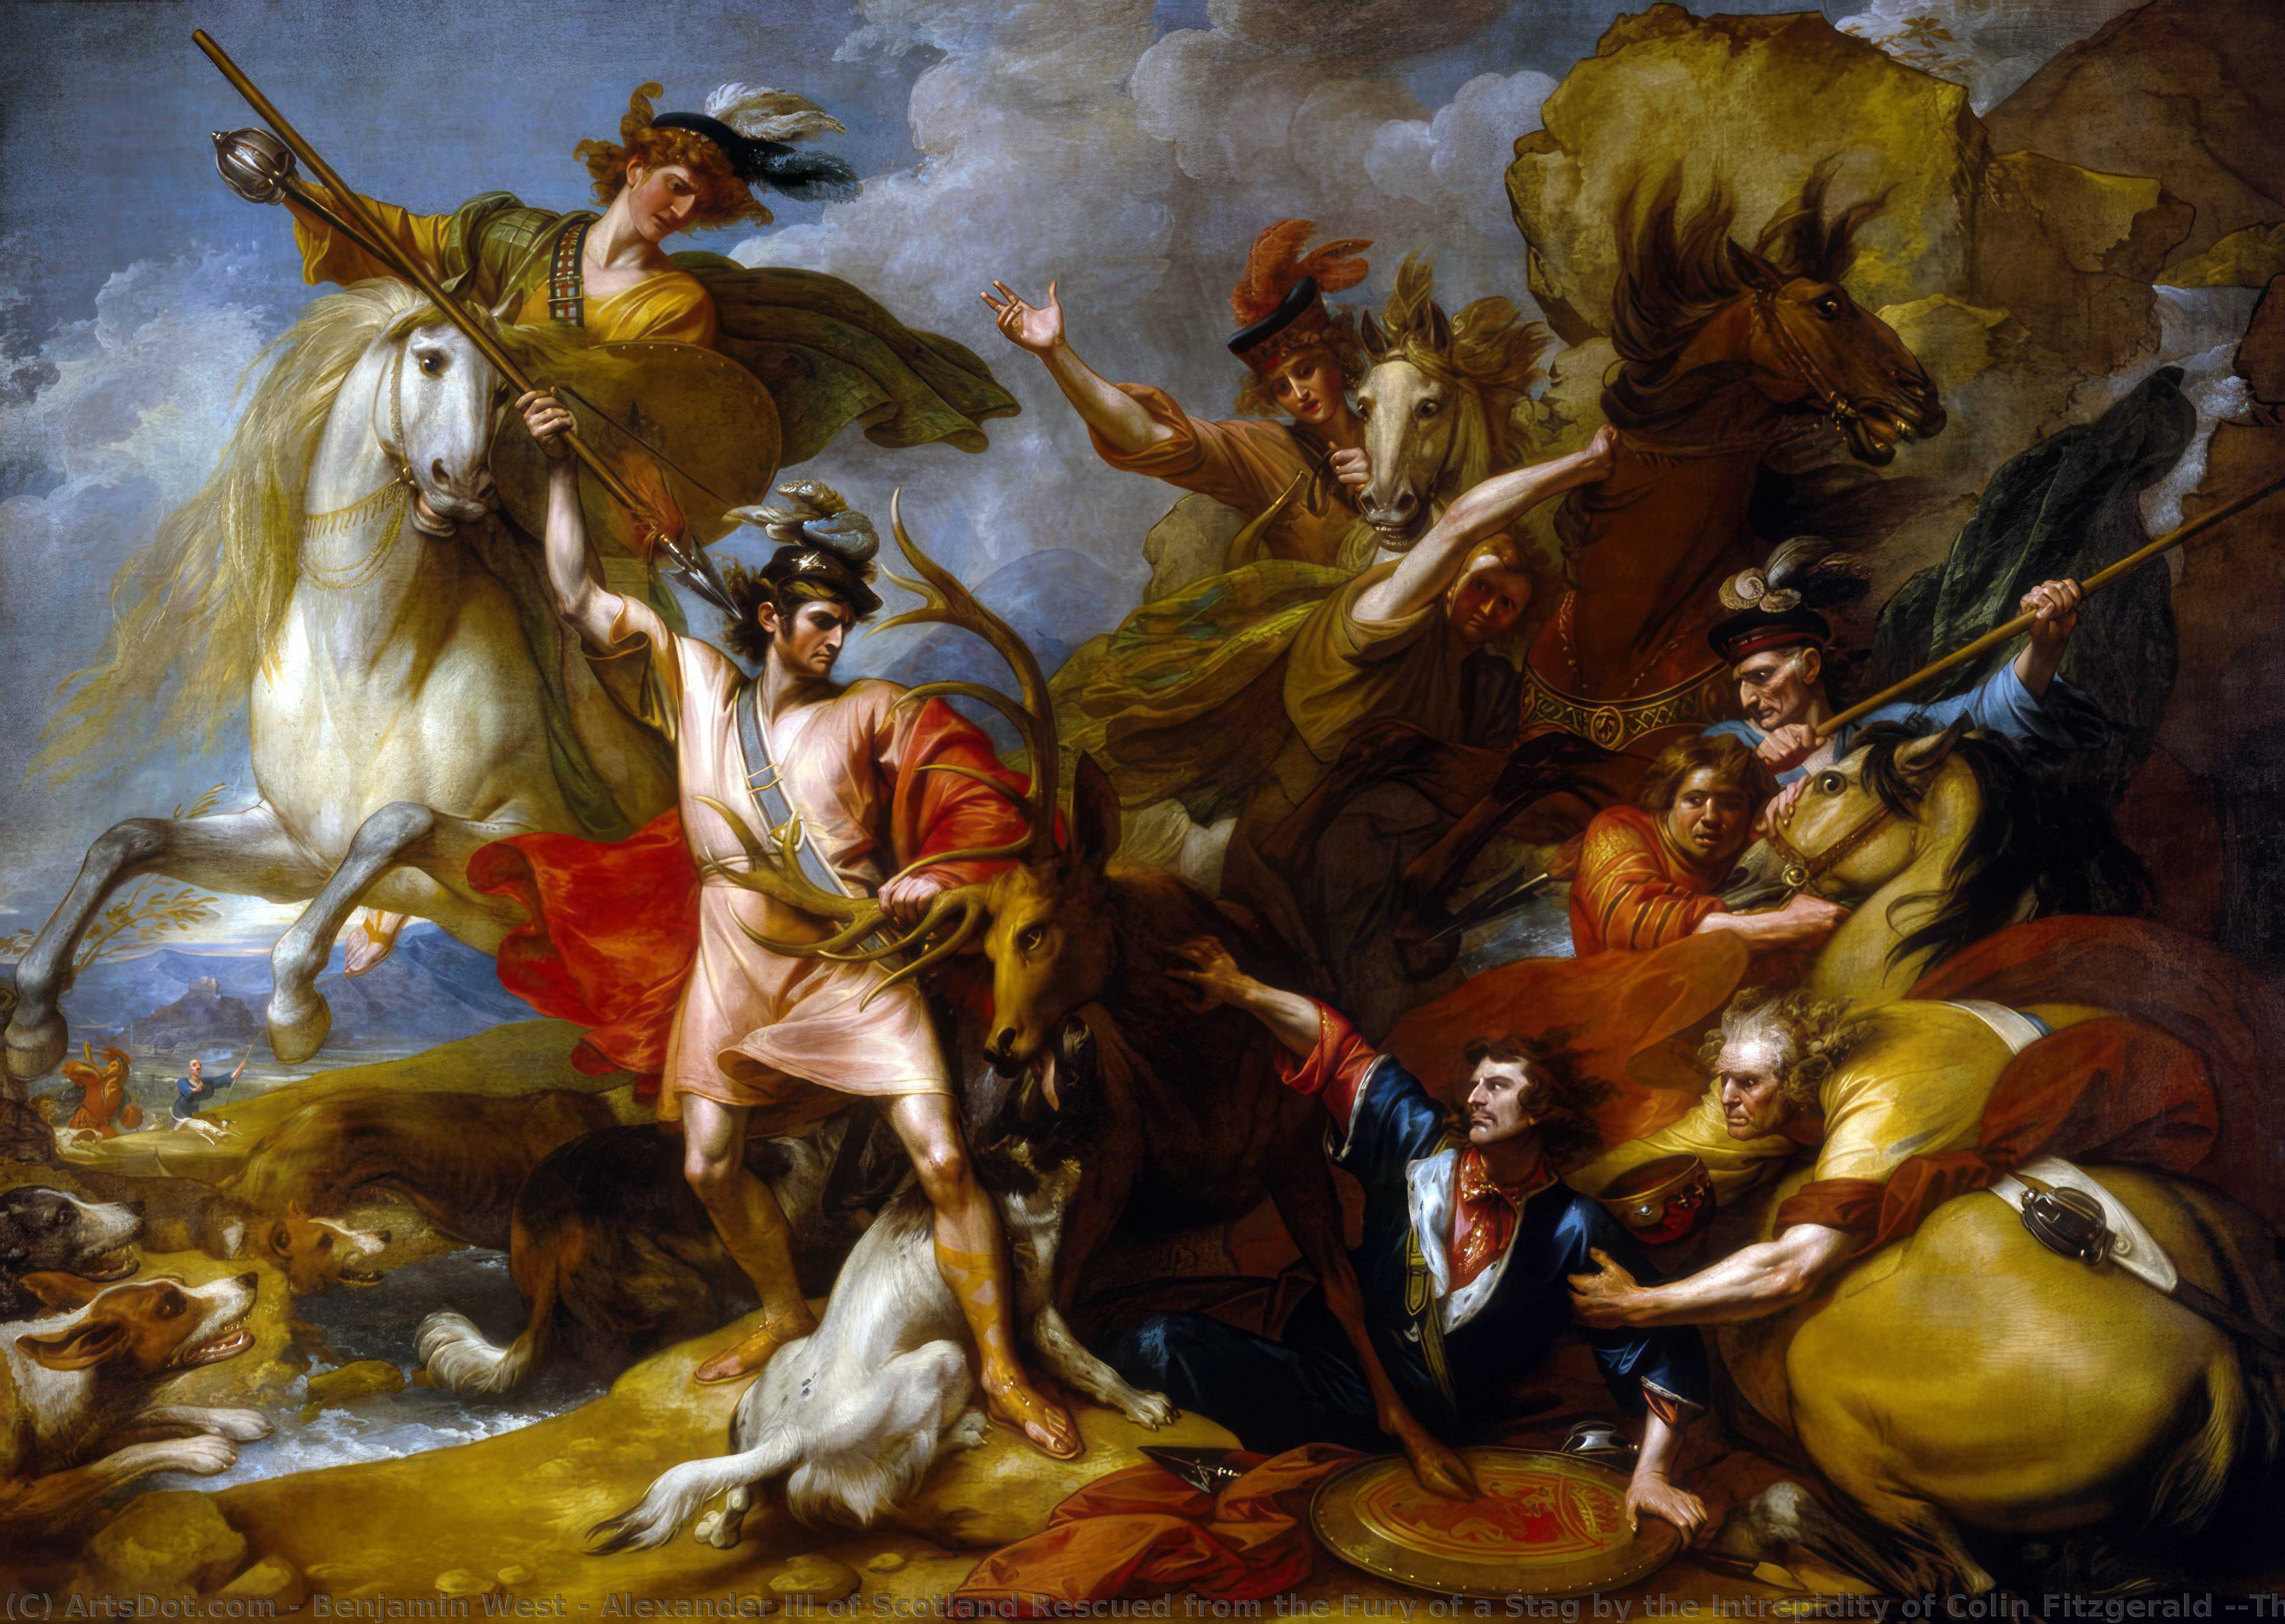 WikiOO.org - Enciclopedia of Fine Arts - Pictura, lucrări de artă Benjamin West - Alexander III of Scotland Rescued from the Fury of a Stag by the Intrepidity of Colin Fitzgerald ('The Death of the Stag')